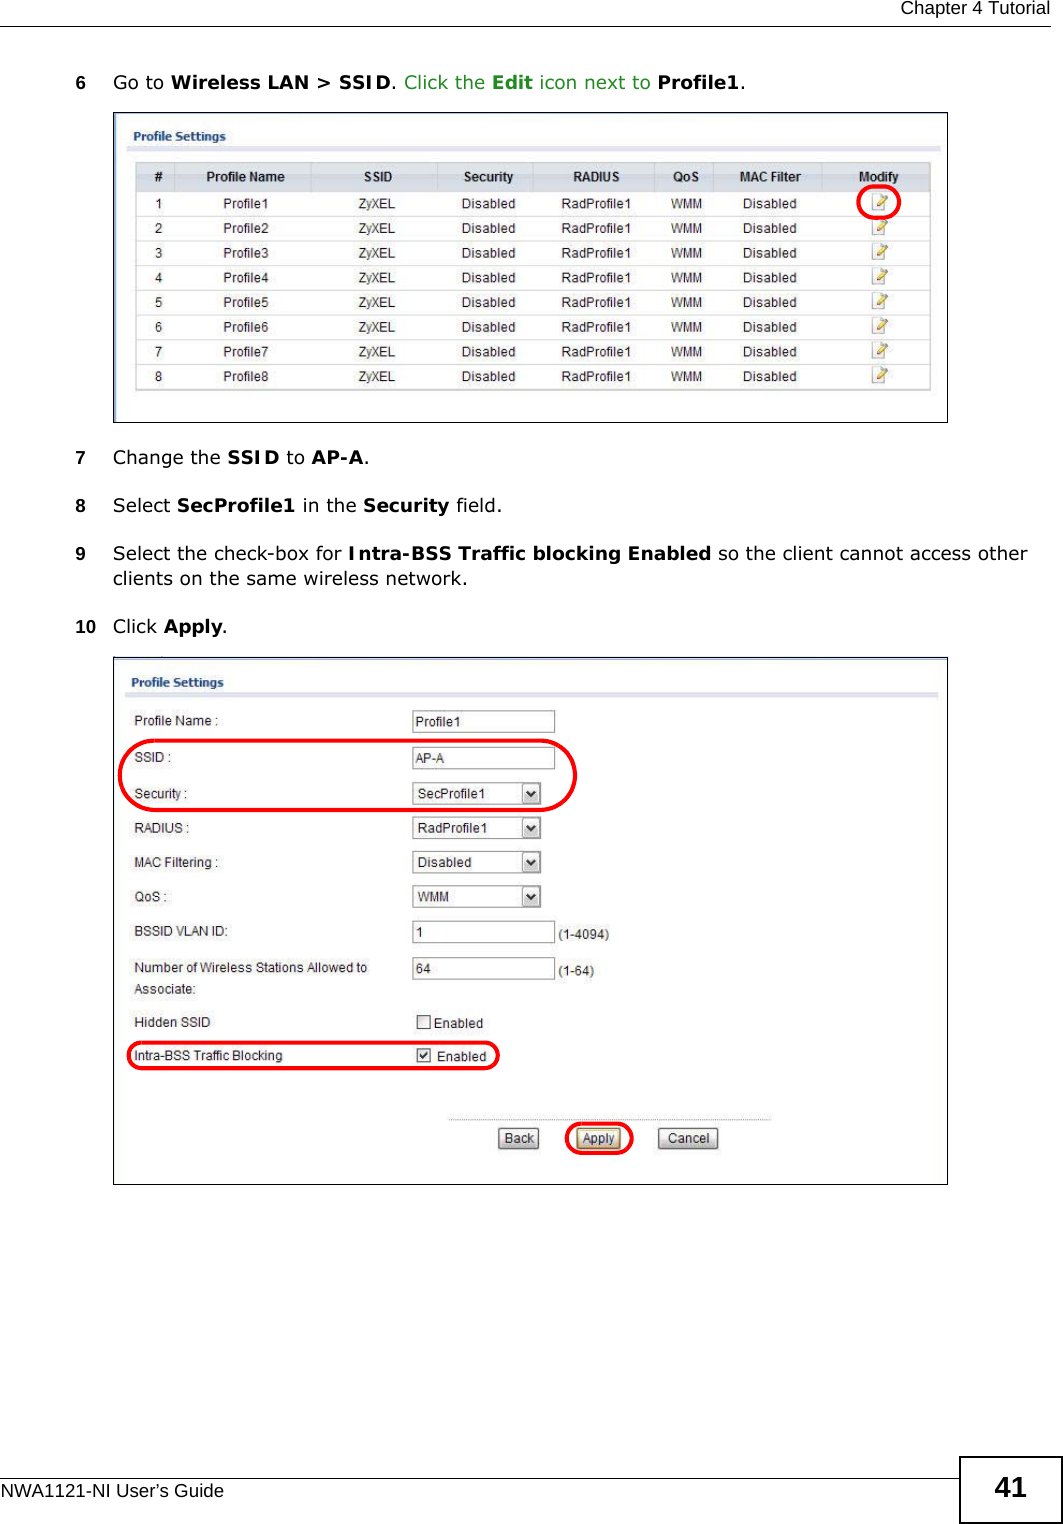  Chapter 4 TutorialNWA1121-NI User’s Guide 416Go to Wireless LAN &gt; SSID. Click the Edit icon next to Profile1.7Change the SSID to AP-A. 8Select SecProfile1 in the Security field. 9Select the check-box for Intra-BSS Traffic blocking Enabled so the client cannot access other clients on the same wireless network.10 Click Apply.